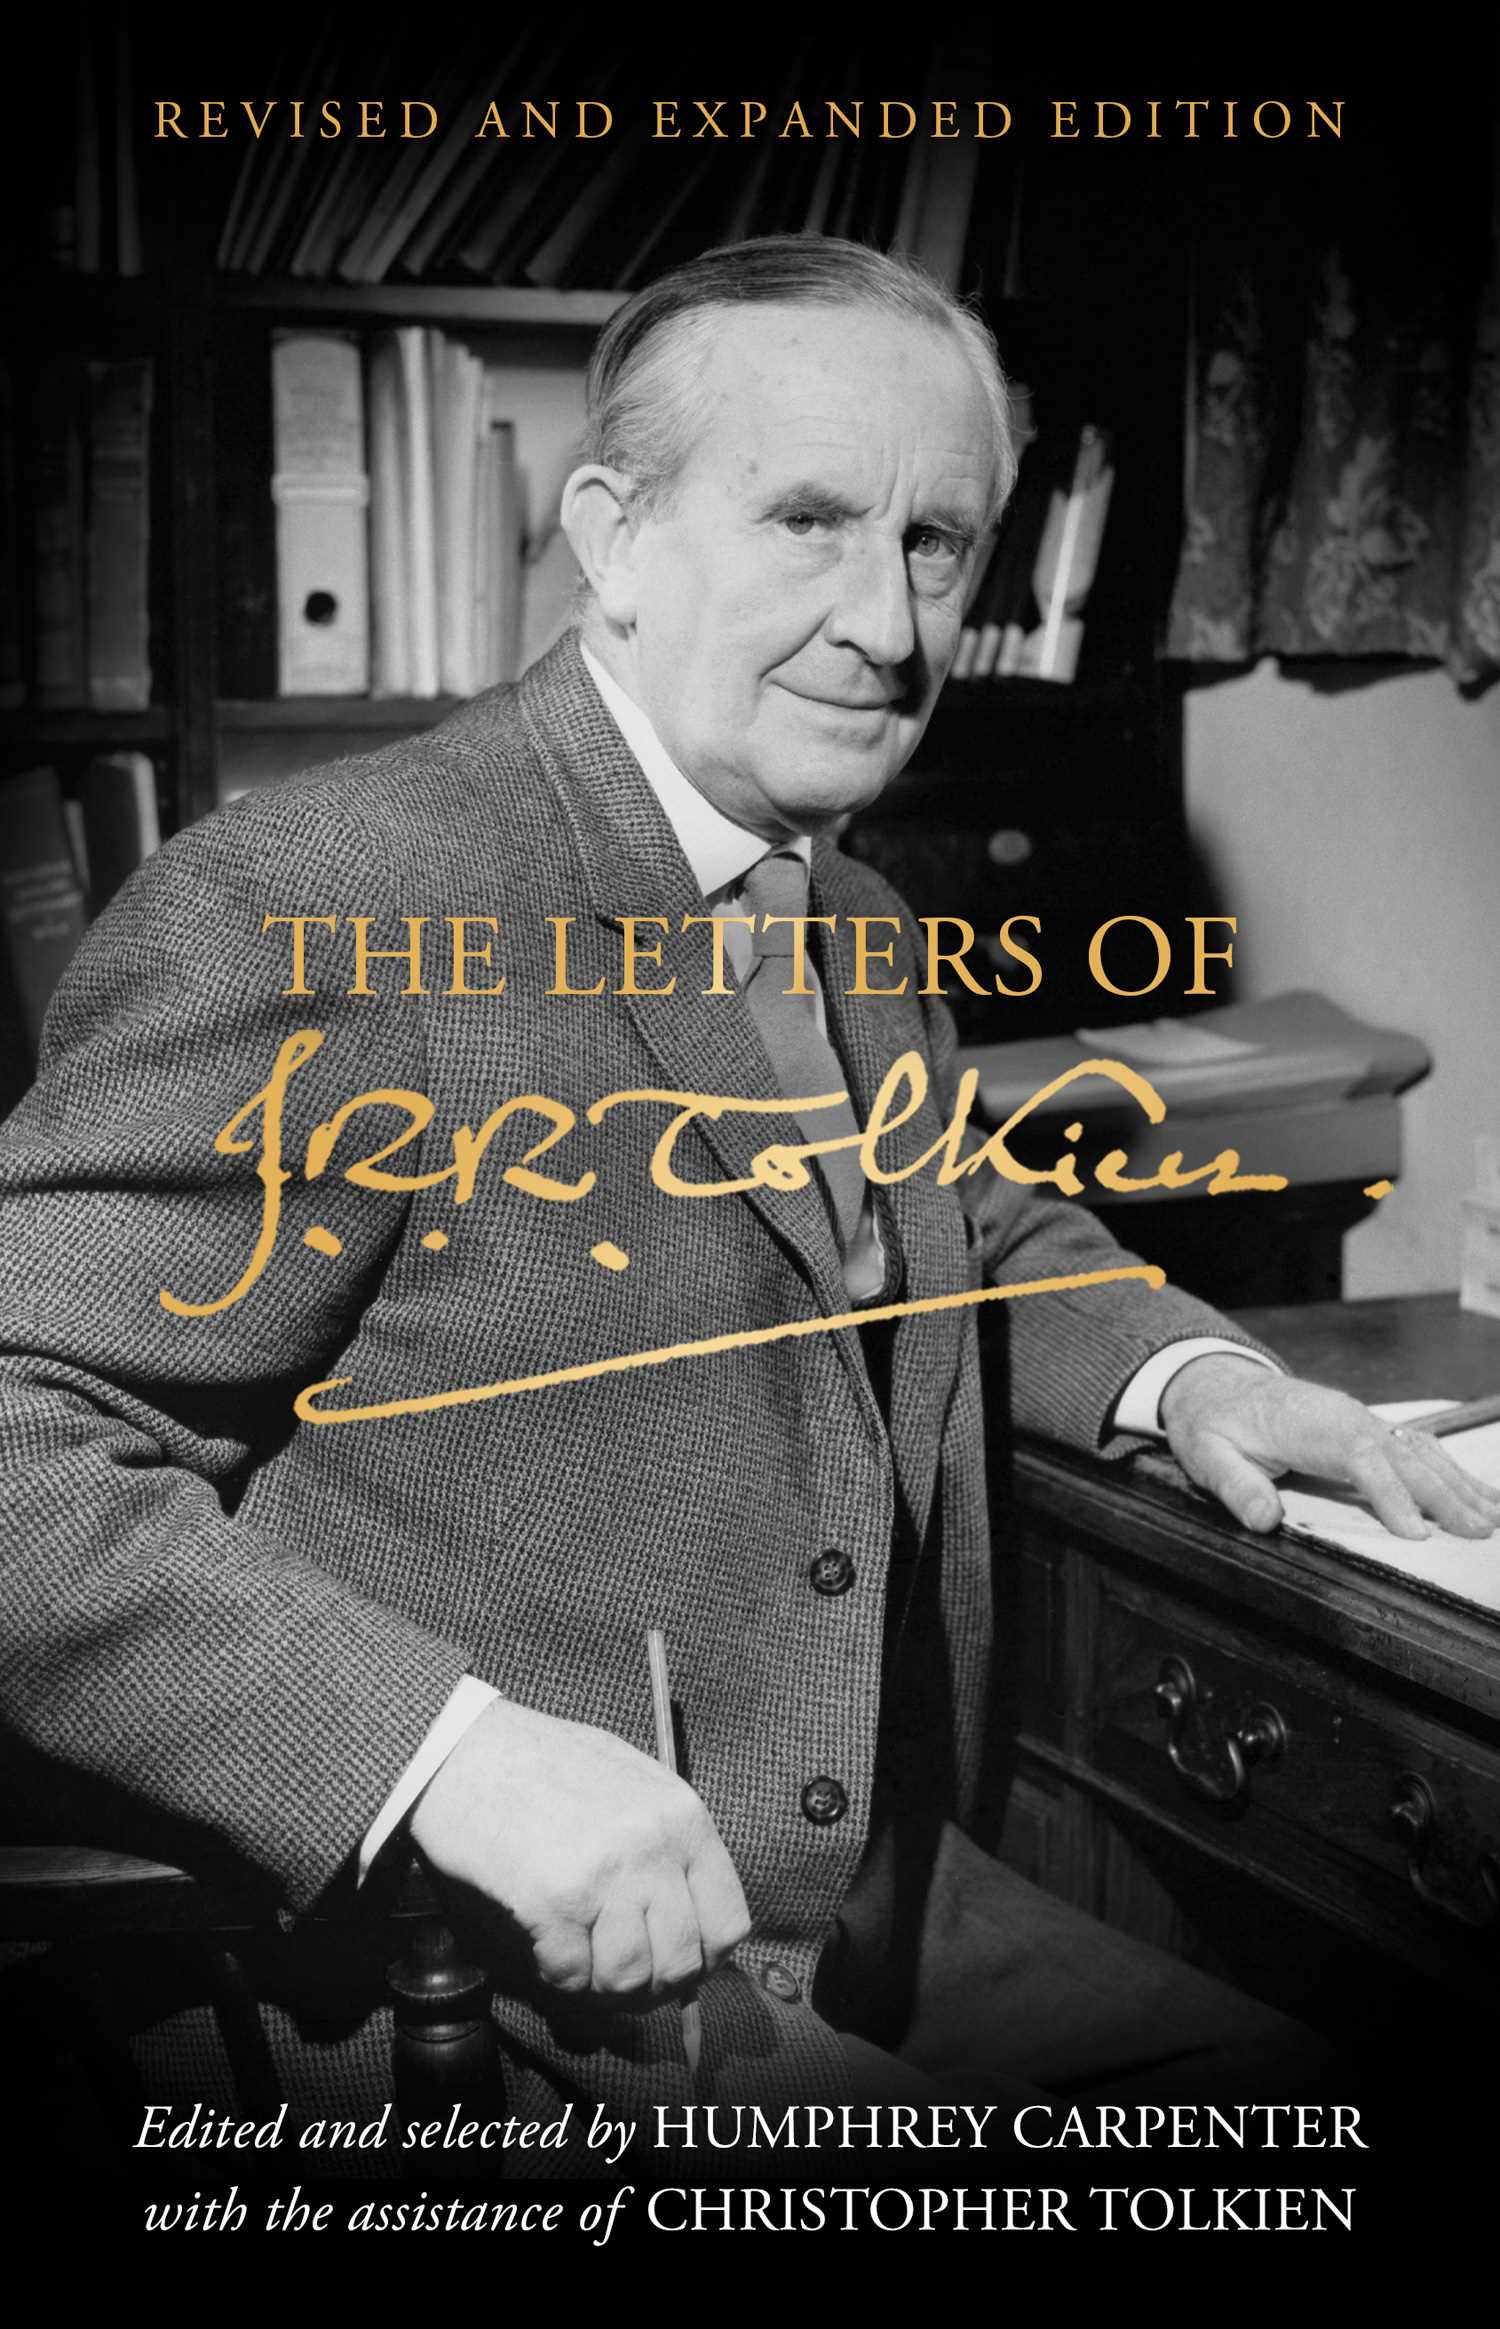 The Letters of J. R. R. Tolkien (Revised and Expanded Edition)